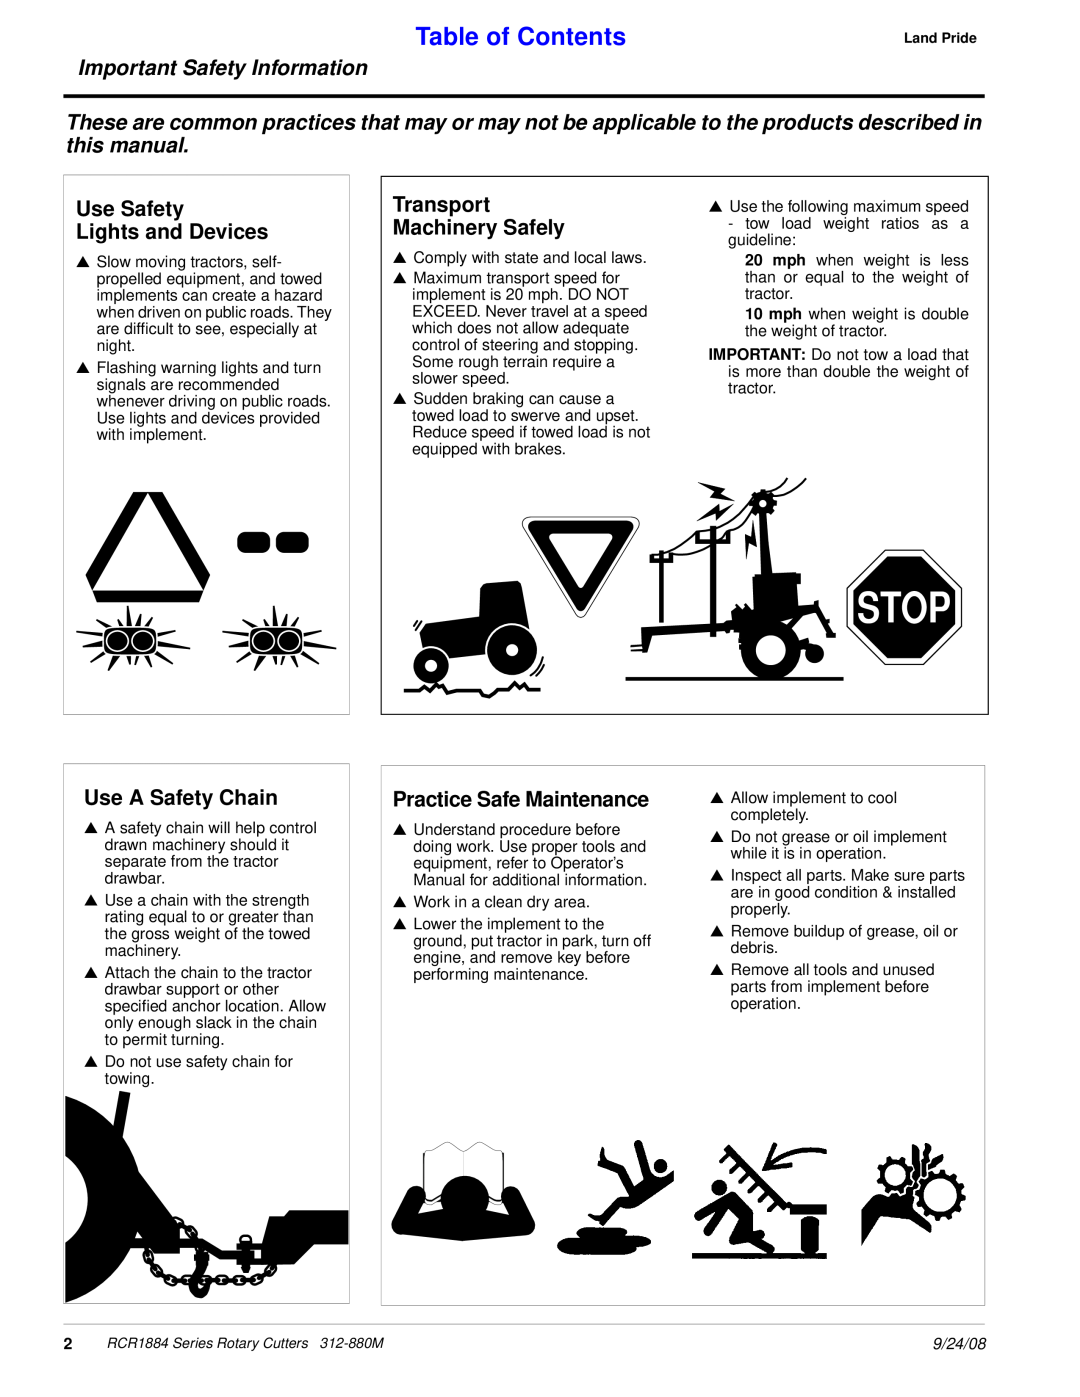 Land Pride RCR1884 Table of Contents, Important Safety Information, Use Safety Lights and Devices, Use A Safety Chain 